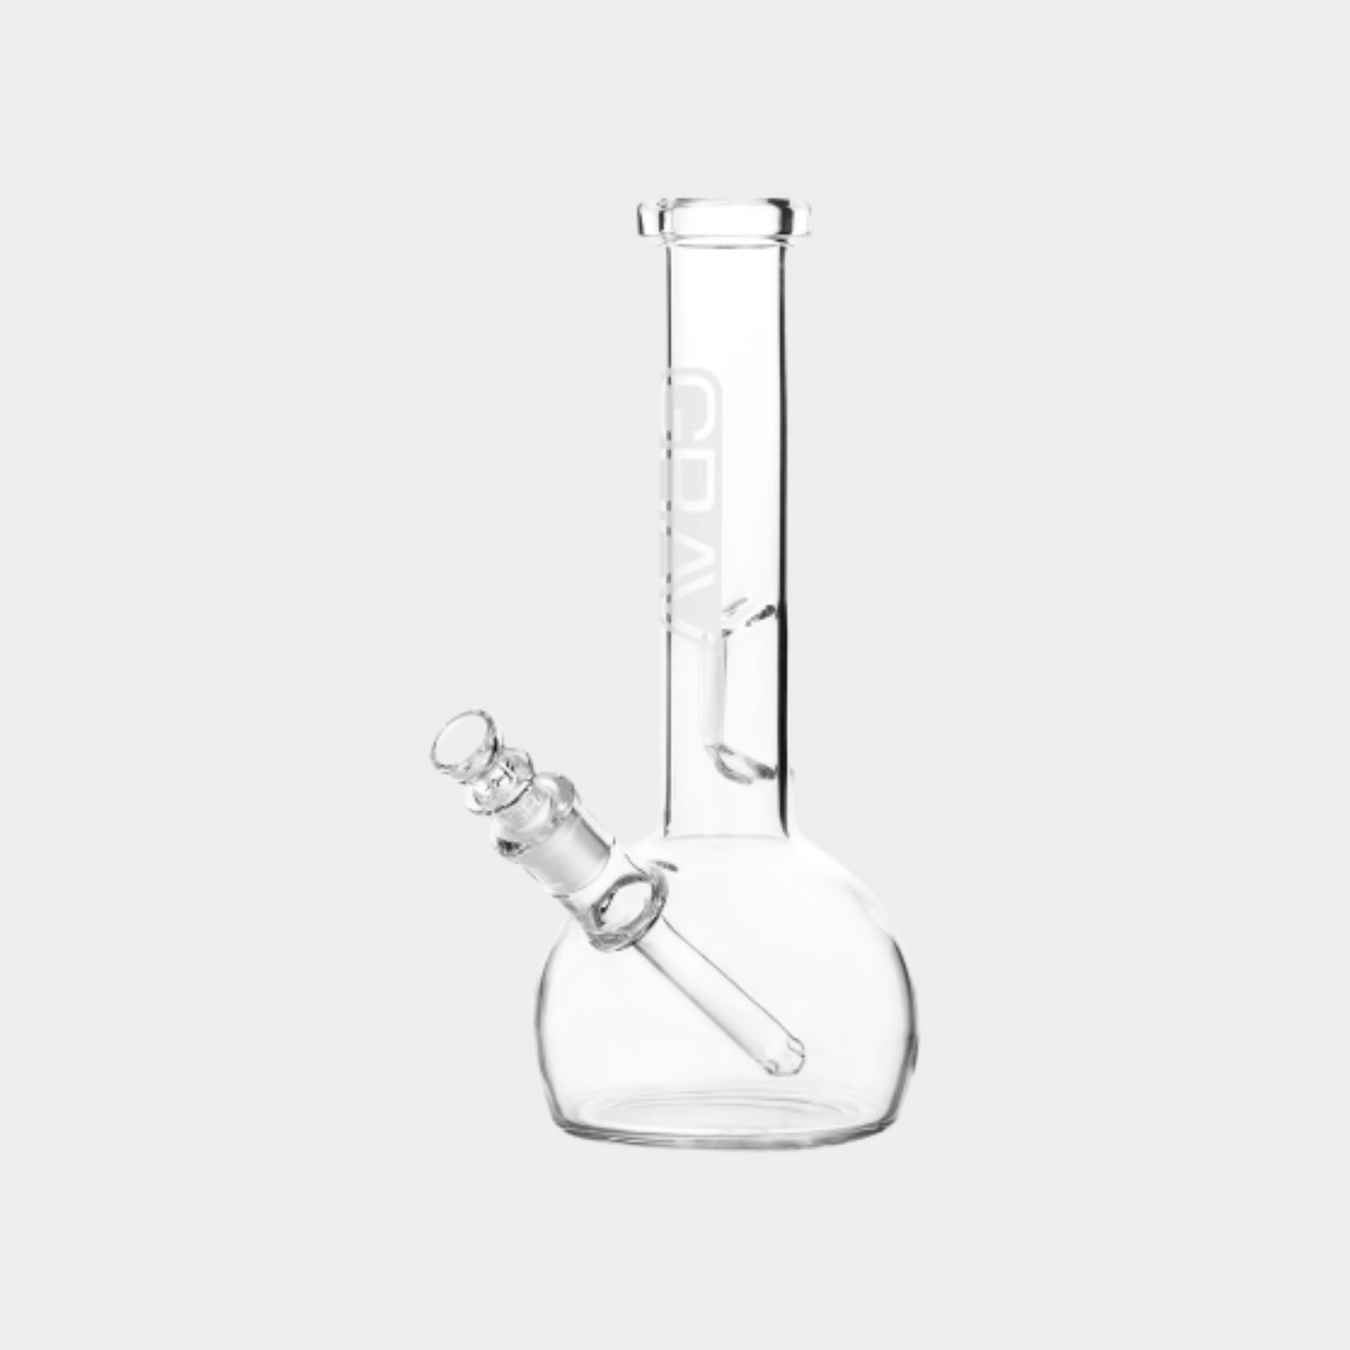 The Jupiter Grass Online Head Shop has the best selection of Bongs and Water Pipes.